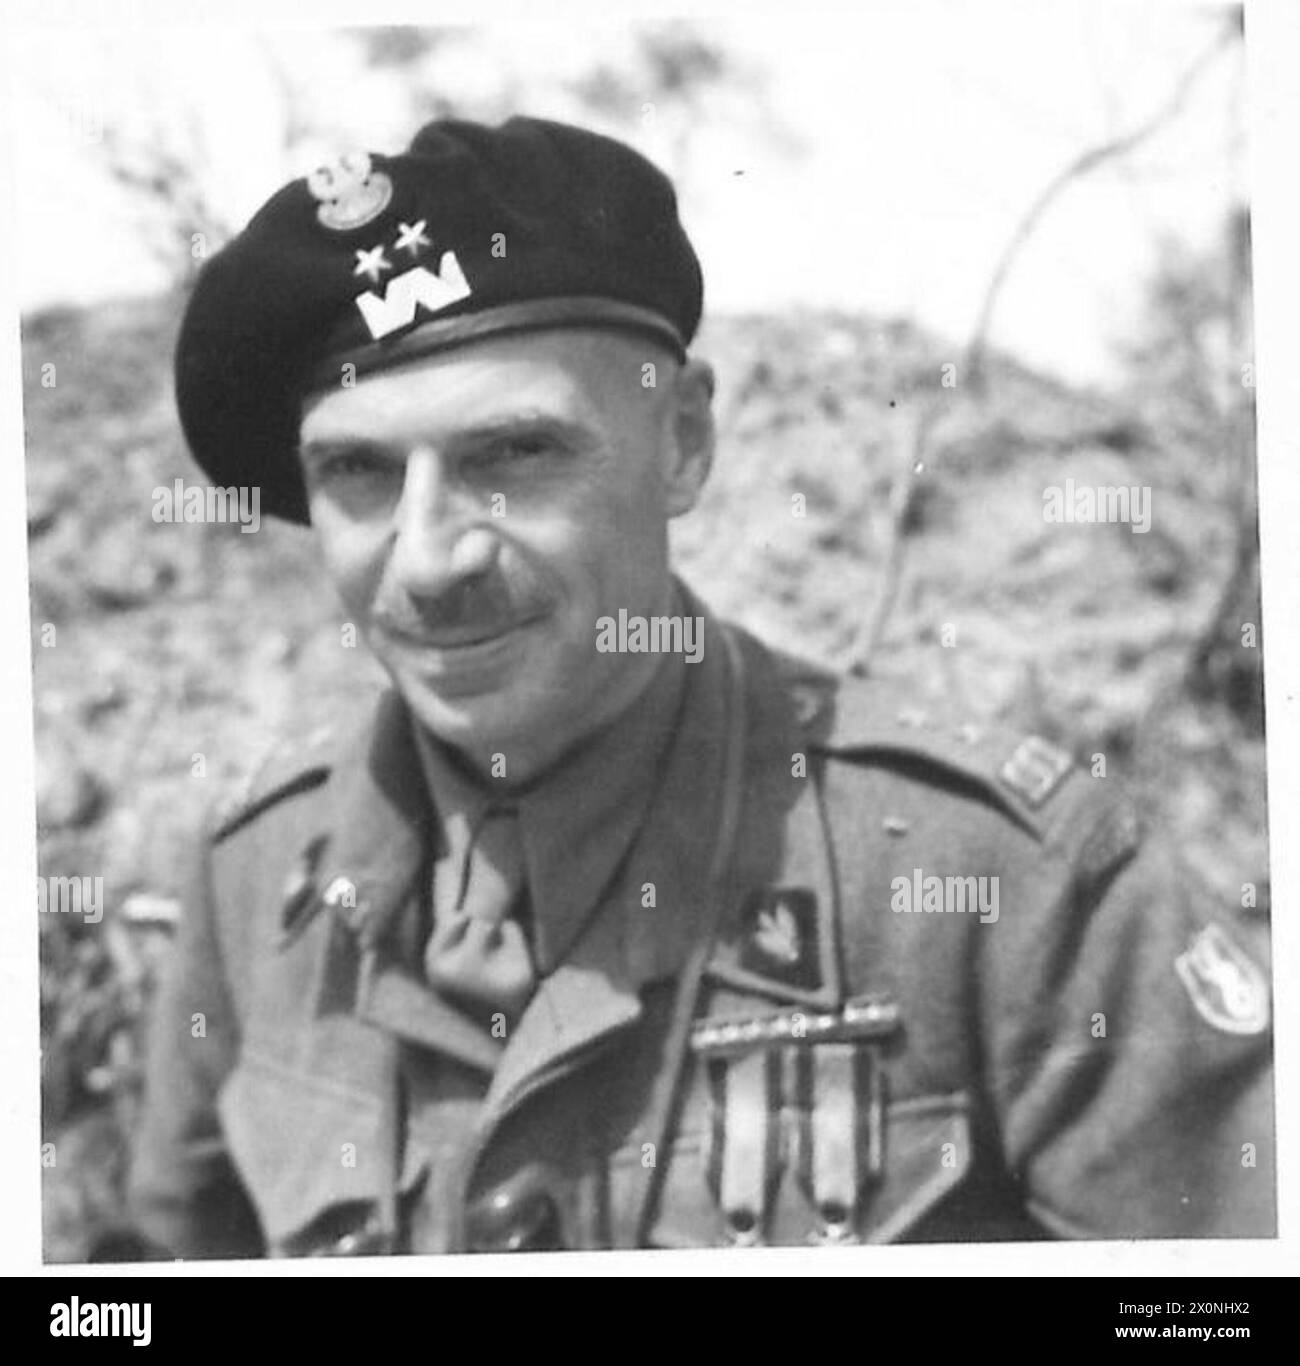 ALLIED ARMIES IN THE ITALIAN CAMPAIGN, 1943-1945 - Portrait of smiling General Władysław Anders, the CO of the 2nd Polish Corps. Photograph taken during General's visit to the British 78th Infantry Division at Cervaro (near Cassino) British Army, Polish Army, Polish Armed Forces in the West, Polish Corps, II, 78th Infantry Division, British Army, 8th Army, Anders, Władysław Stock Photo